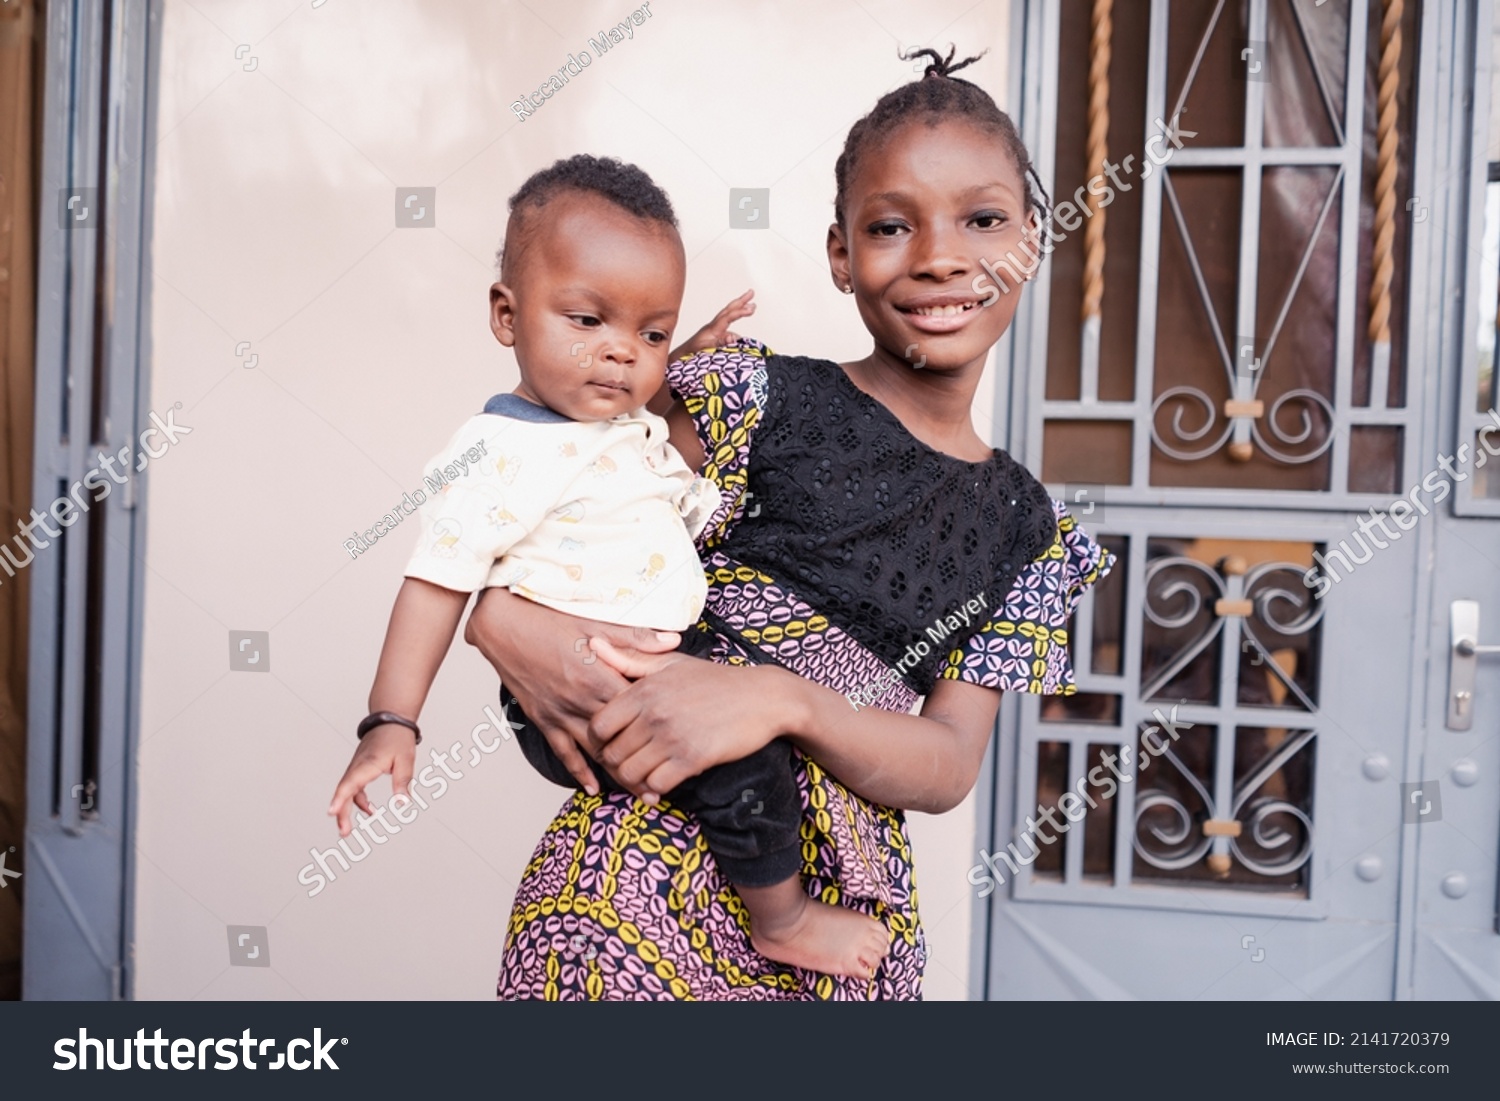 Responsible proud big sister takes care of her little brother, whom she carries in her arms as a matter of course according to African tradition and family ties #2141720379